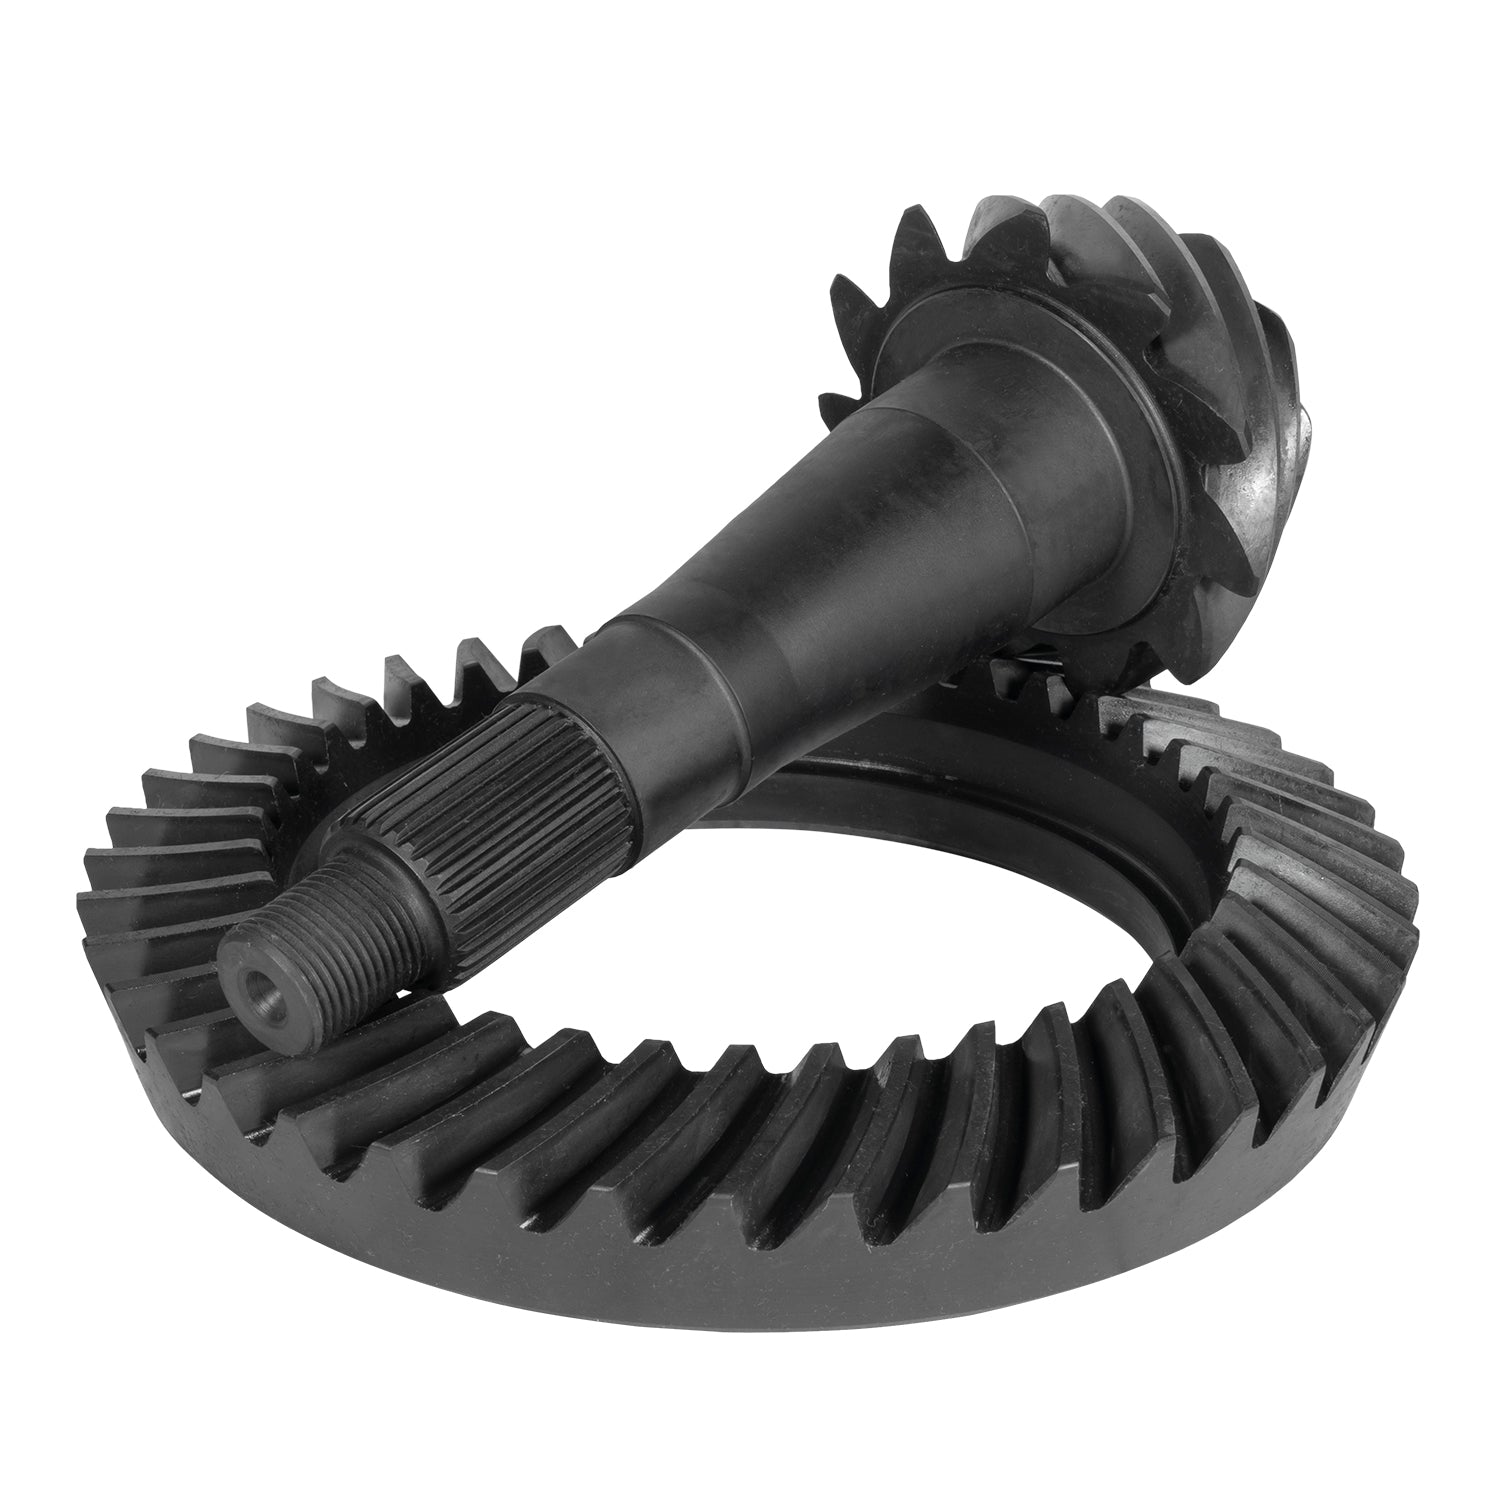 Yukon Gear Chrysler Dodge Plymouth Differential Ring and Pinion Kit - Rear YGK2343